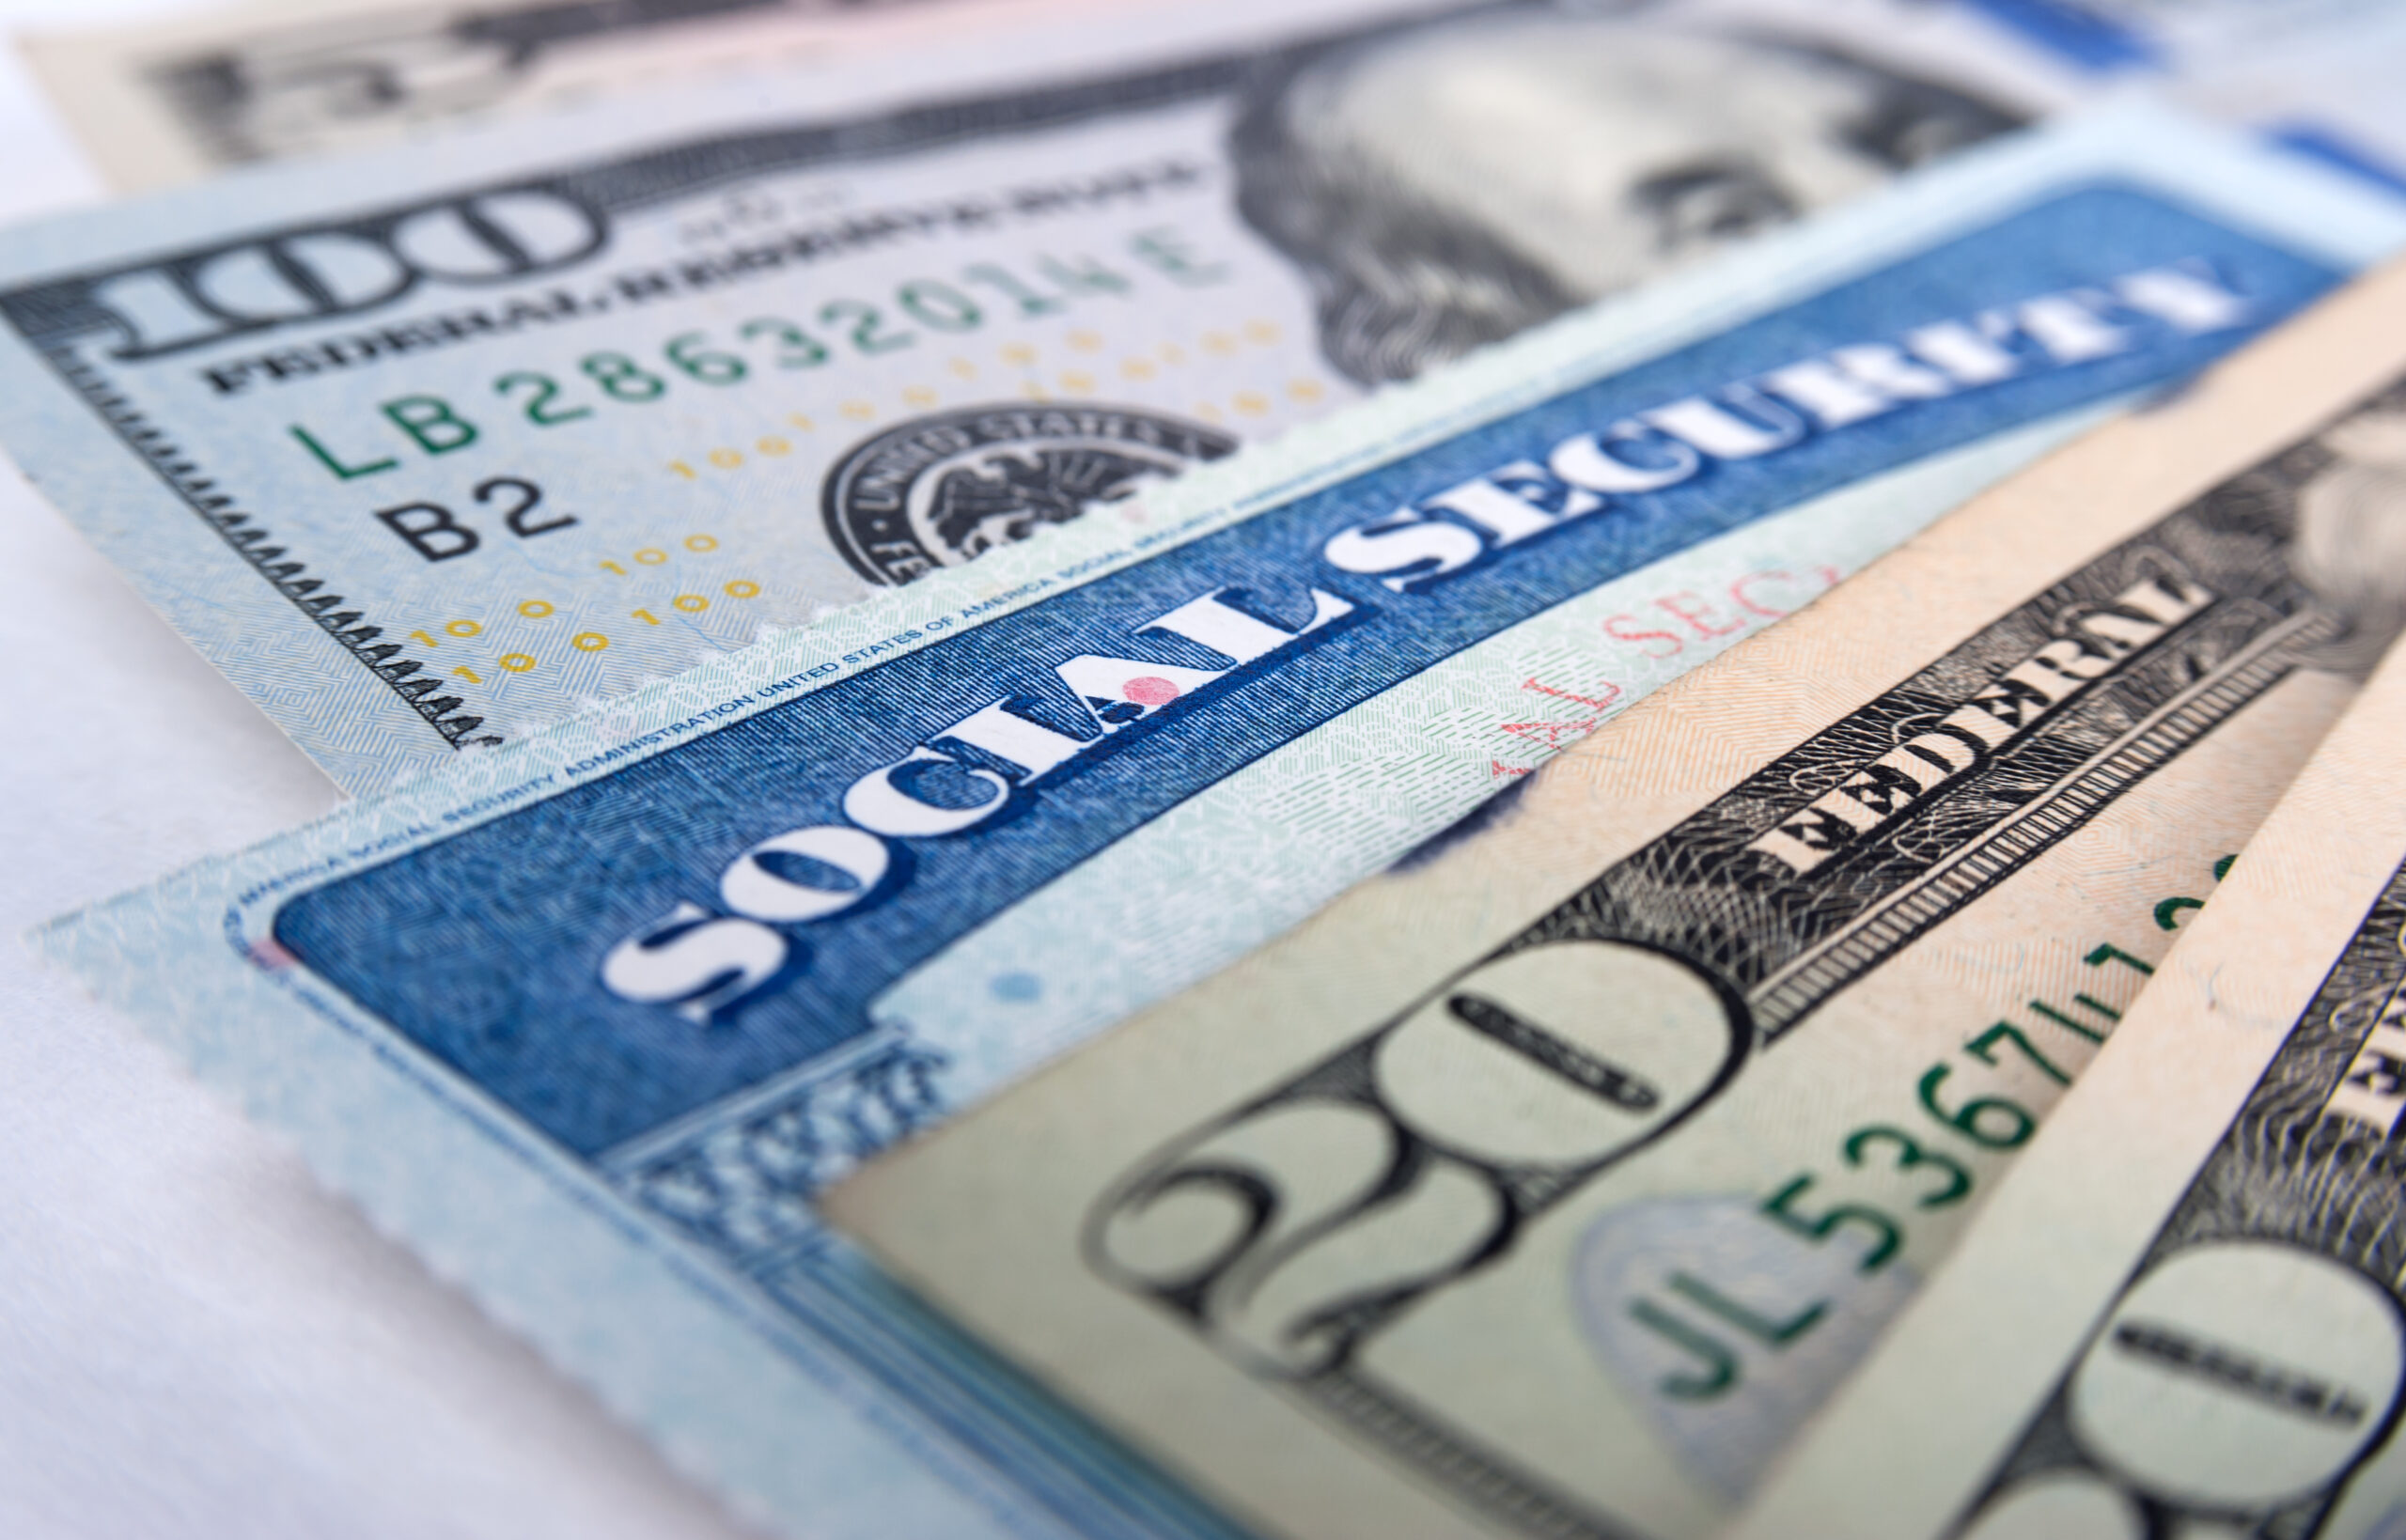 The Social Security Scam